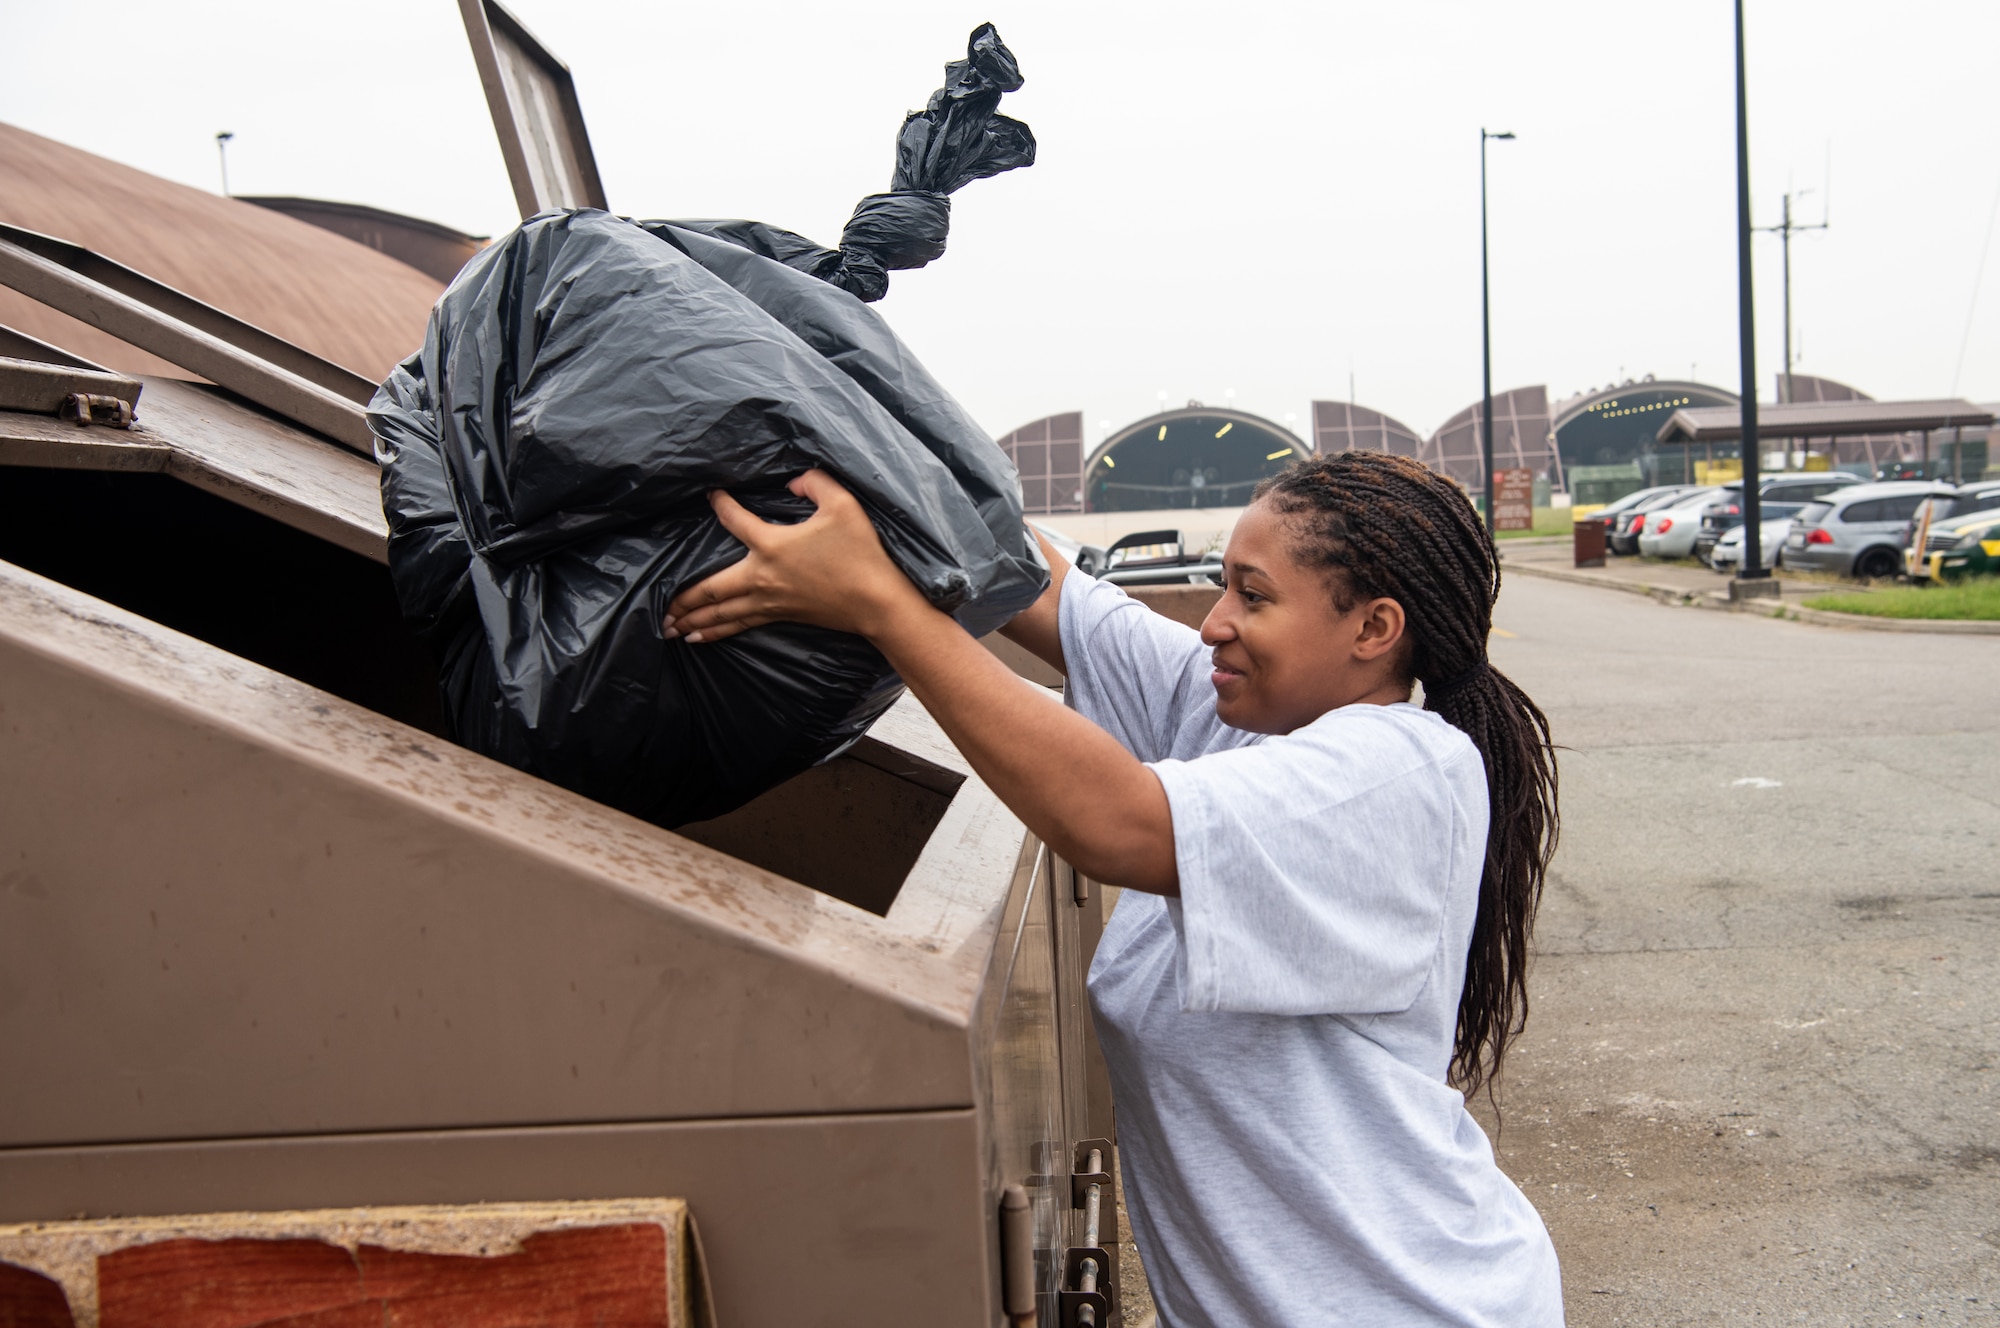 U.S. Air Force Airman 1st Class Sabrina Campbell, 51st Maintenance Squadron precision measurement equipment laboratory technician, throws trash into a dumpster during a base cleanup at Osan Air Base, Republic of Korea, Sept. 13, 2023. Base cleanups prolong the operational lifespan of the base by maintaining a safe and healthy environment. (U.S. Air Force photo by Airman 1st Class Chase Verzaal)